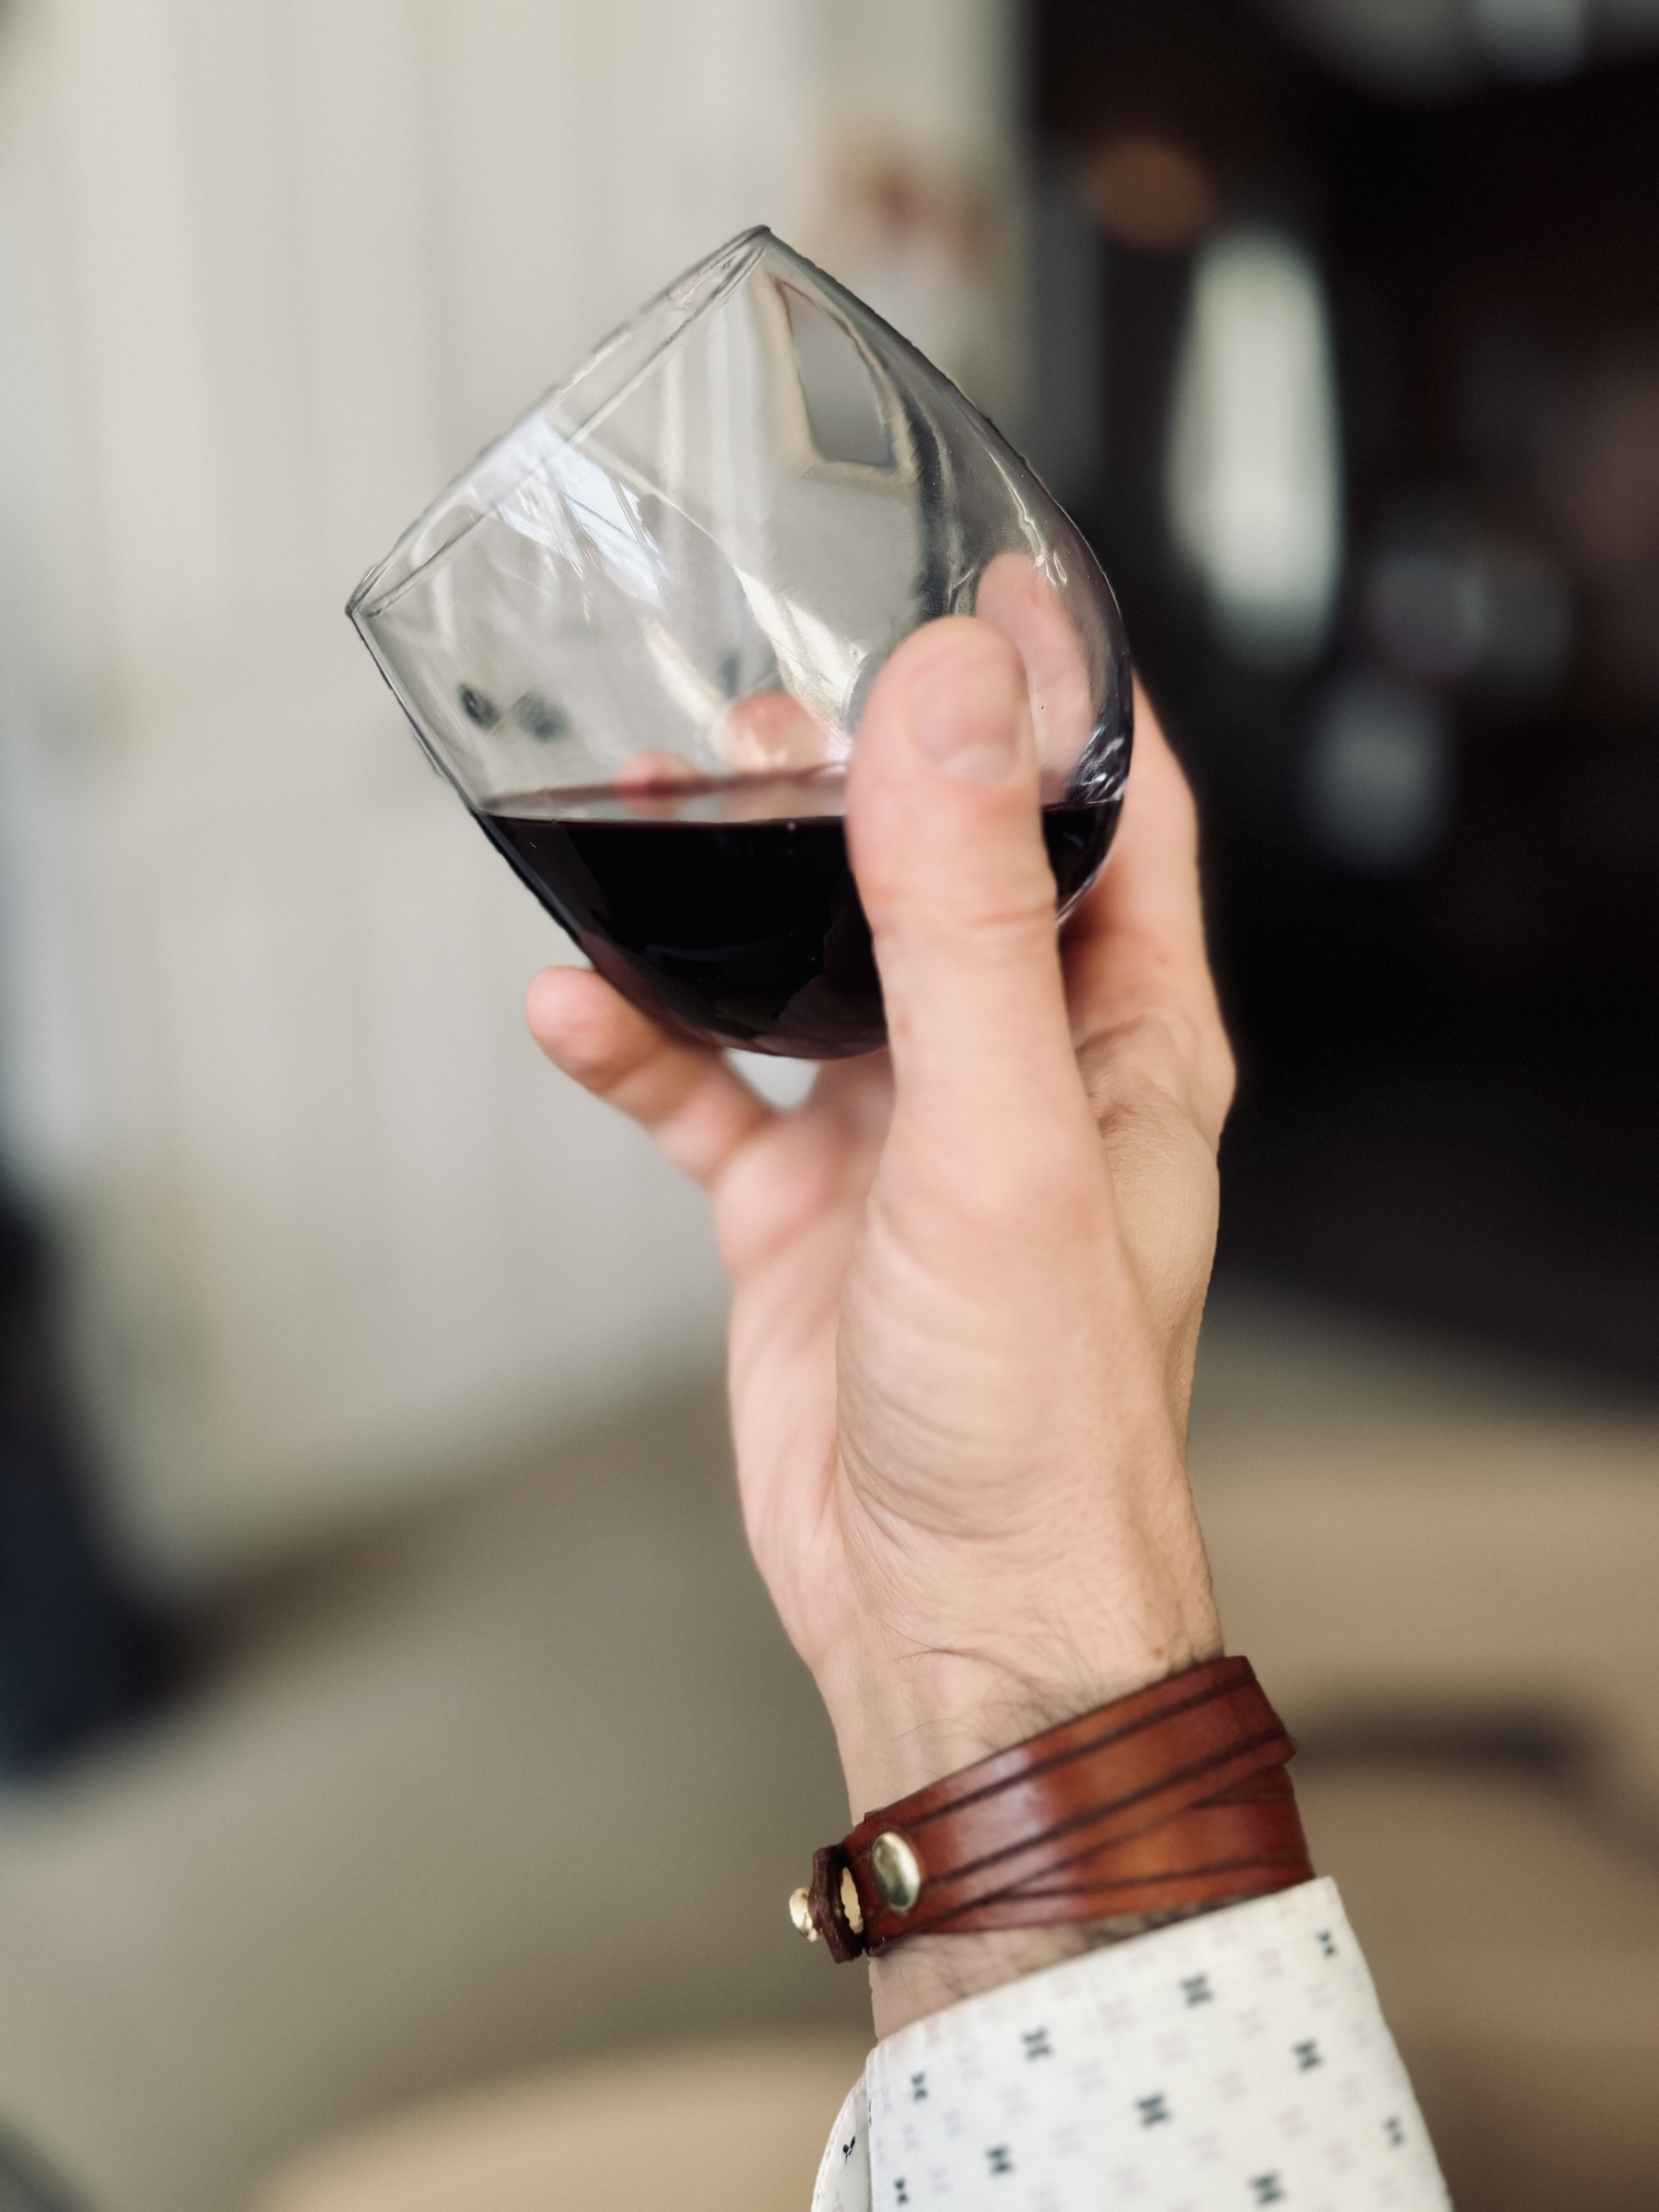 glass of red wine held in hand at an angle, an absolutely simple yet stunning men's leather bracelet visible on the wrist.